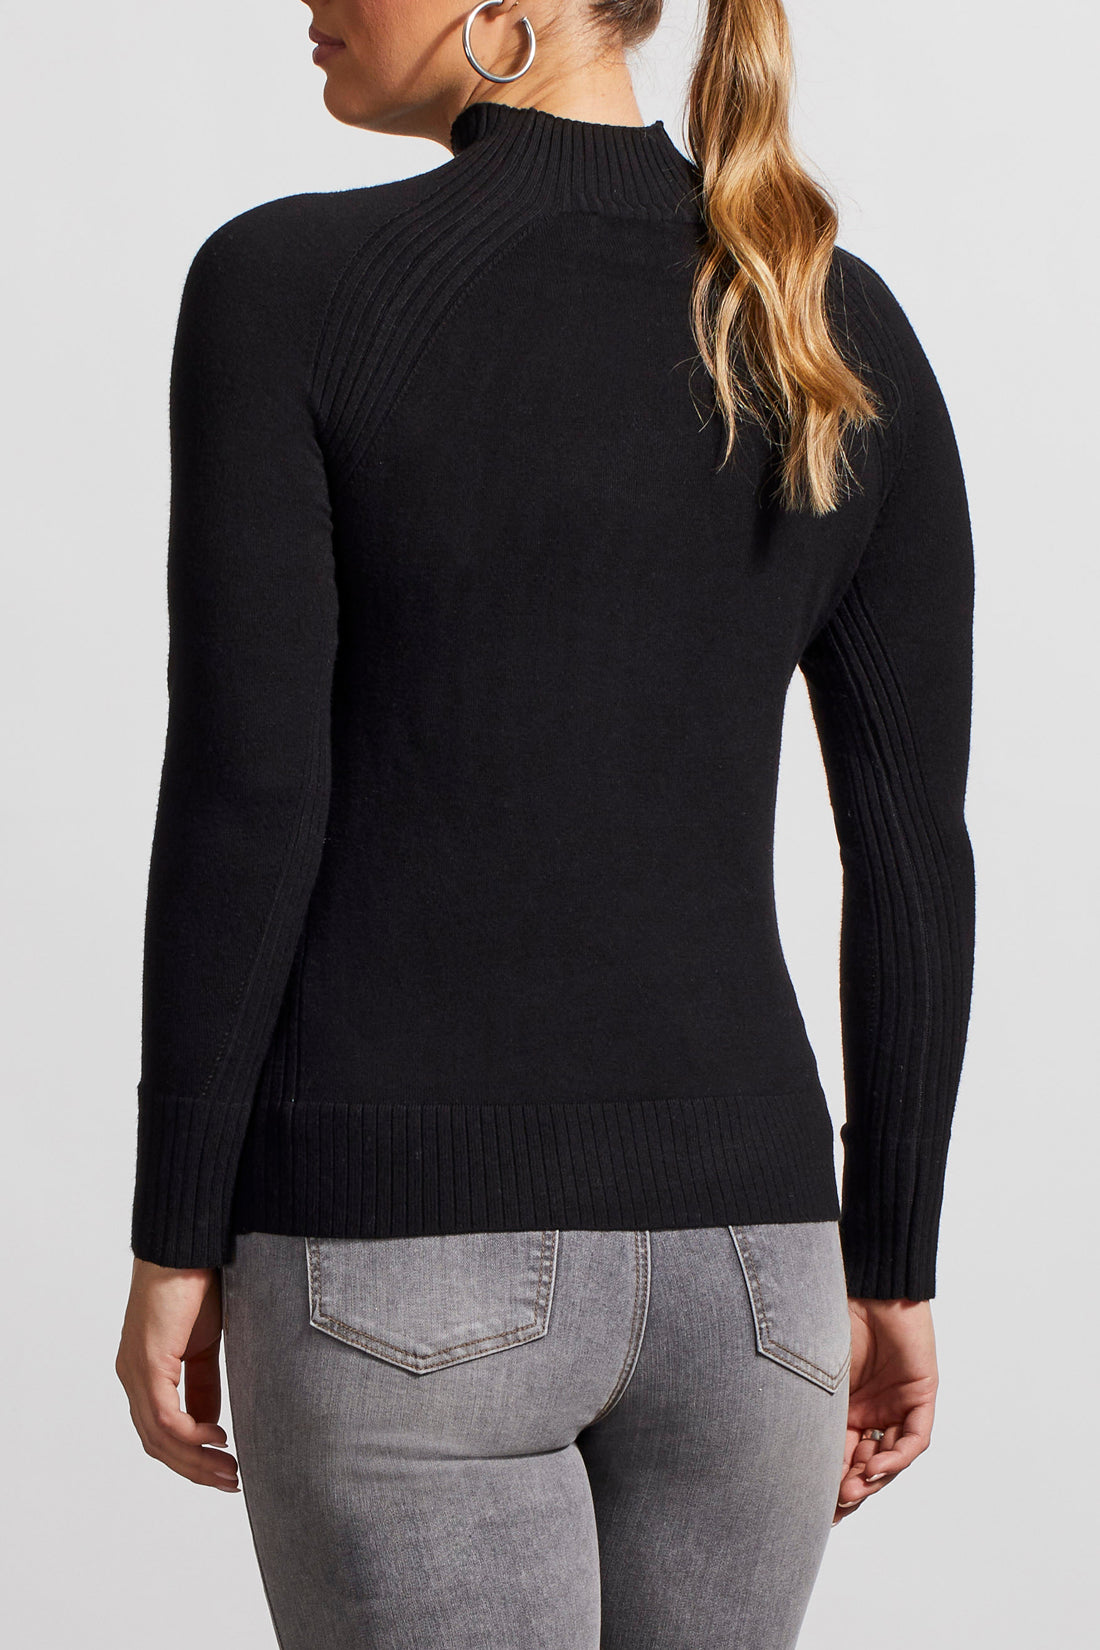 Tribal Fashions Funnel Neck Sweater - Black